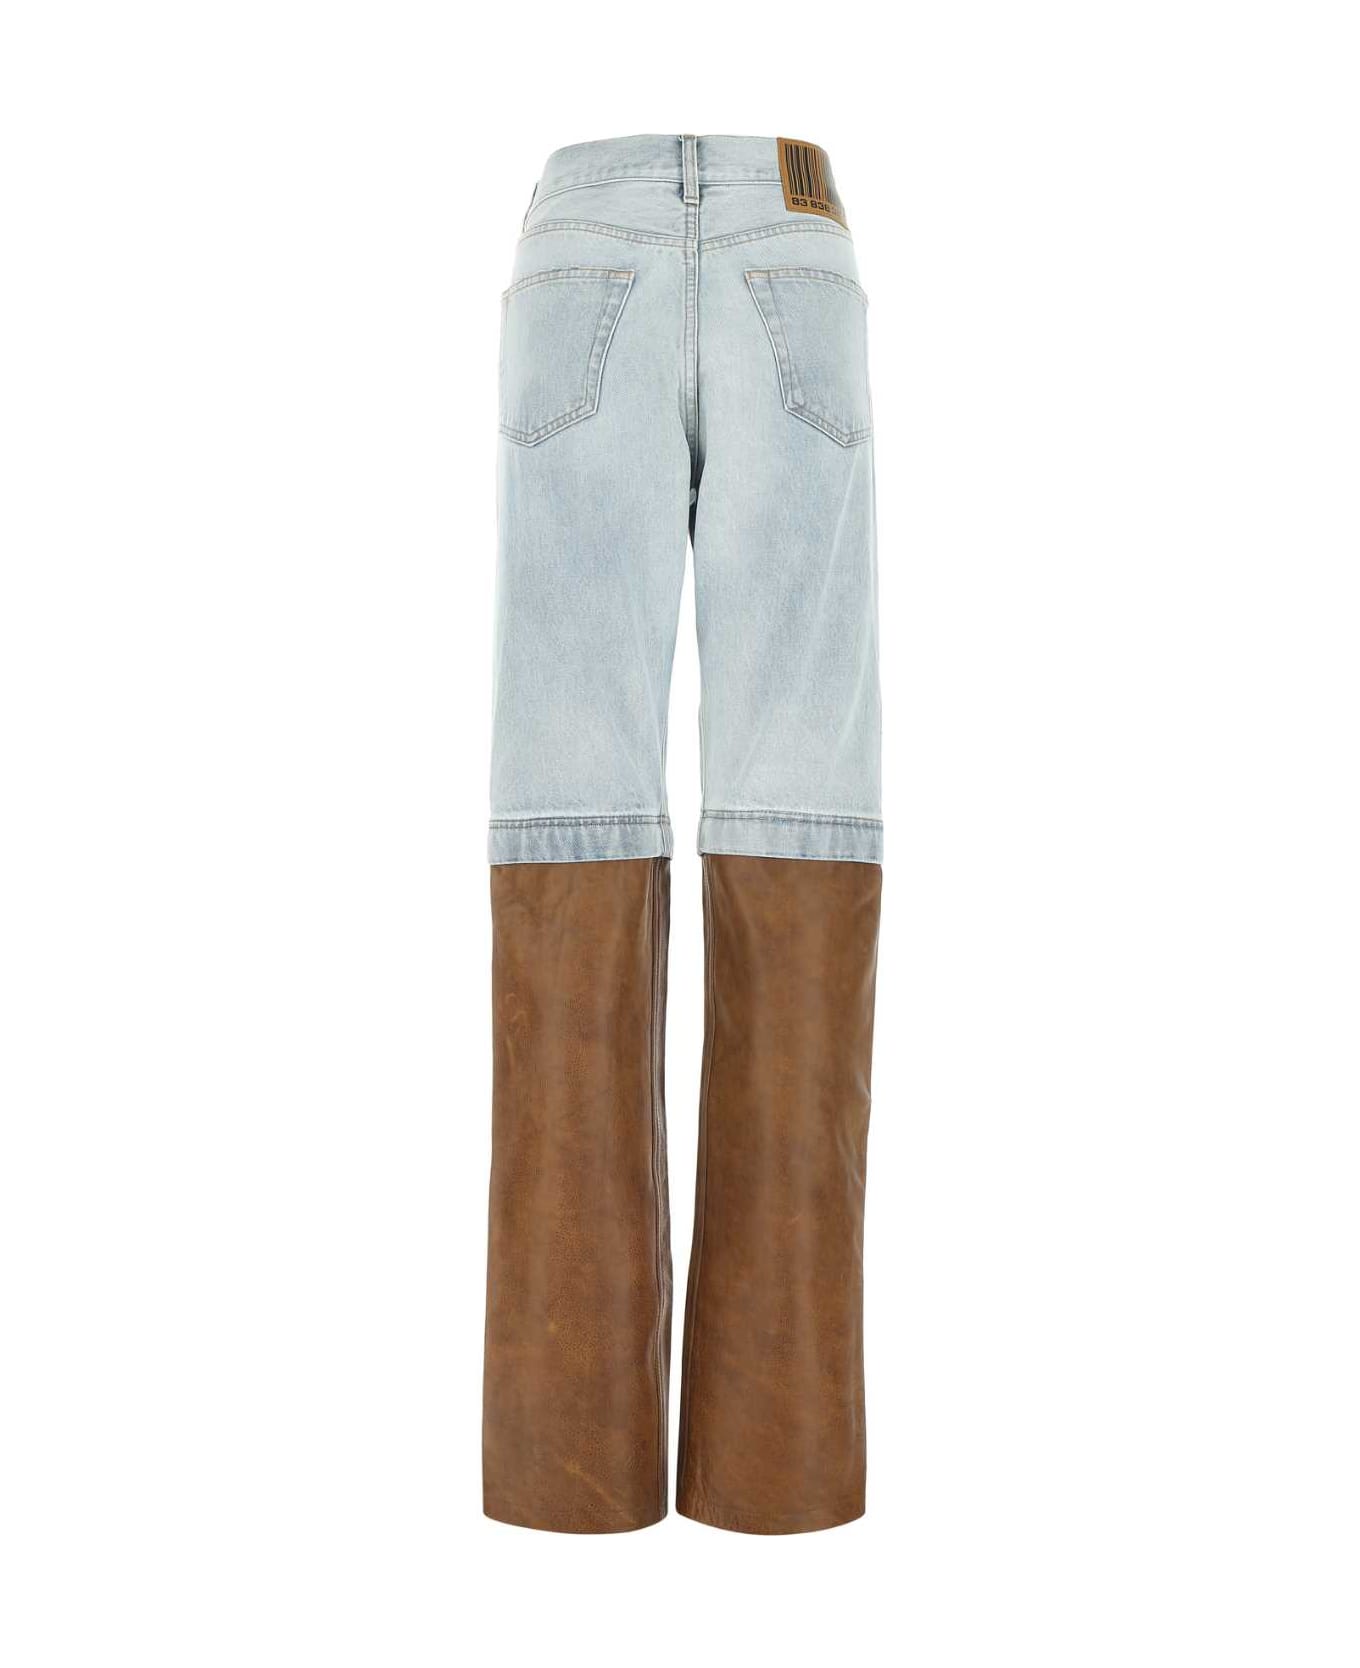 VTMNTS Two-tone Denim And Leather Jeans - BROWNLIGHTBLUE デニム